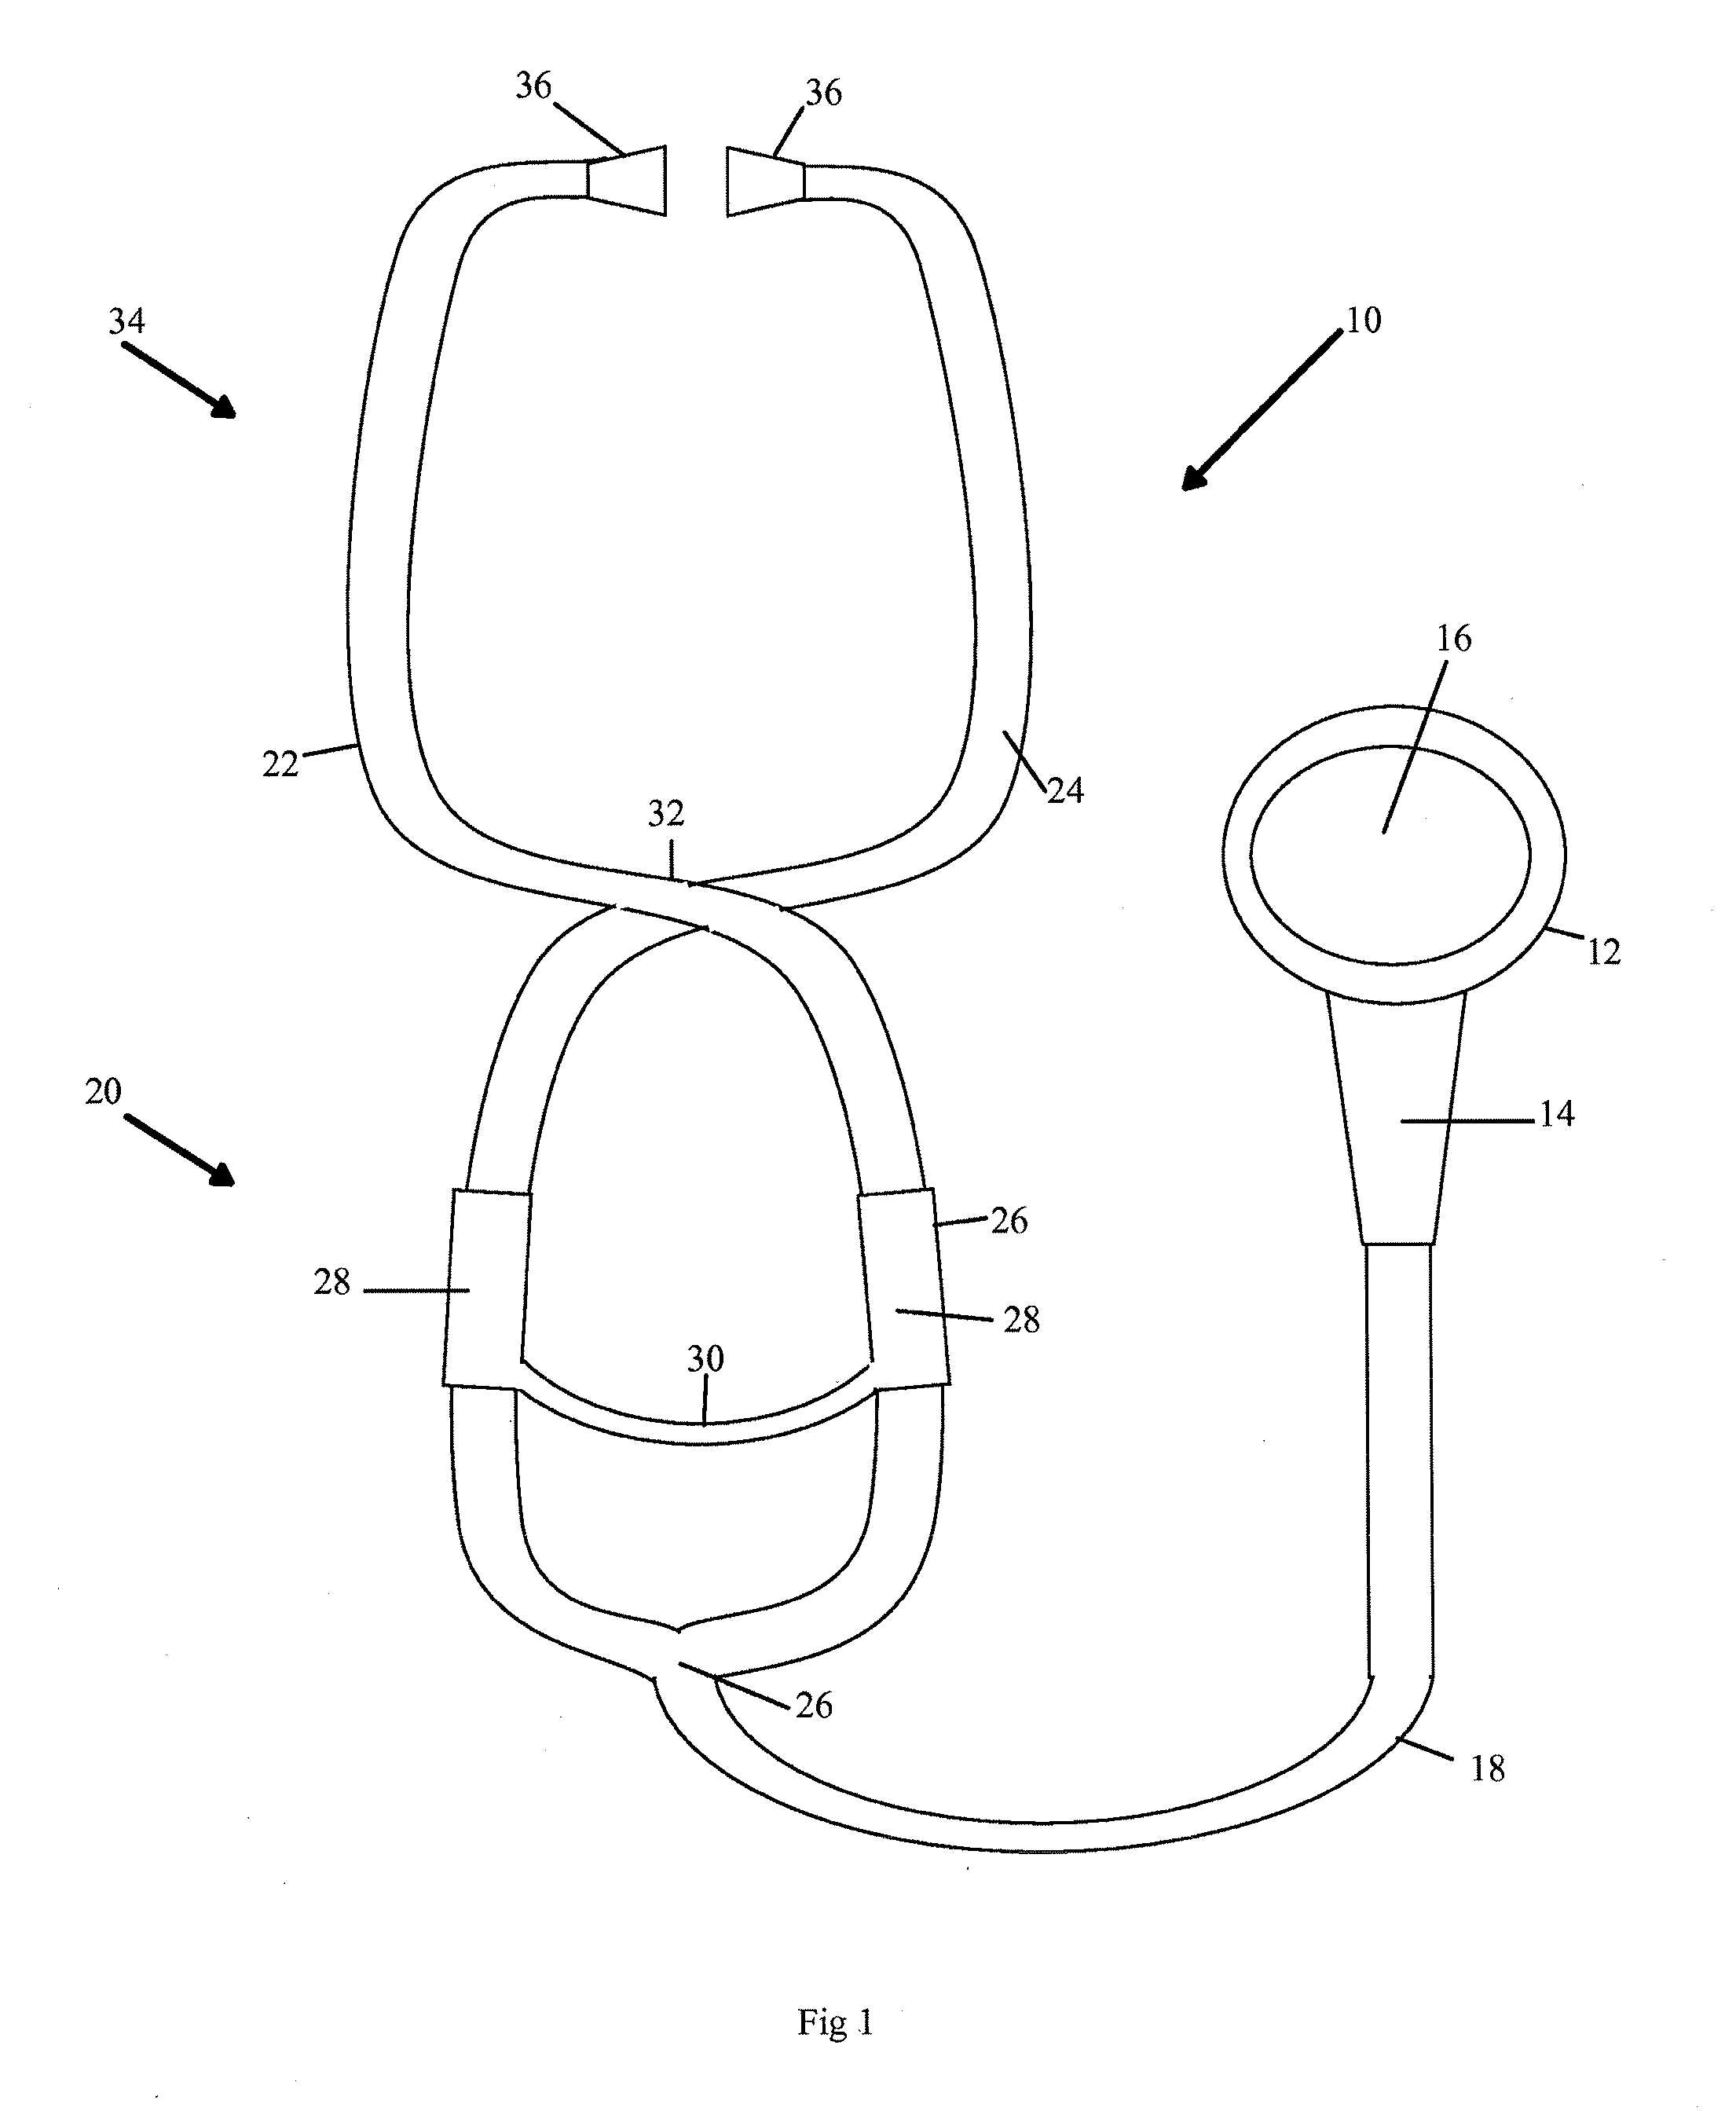 Stethoscope Having An Elliptical Headpiece And Amplified Earpieces